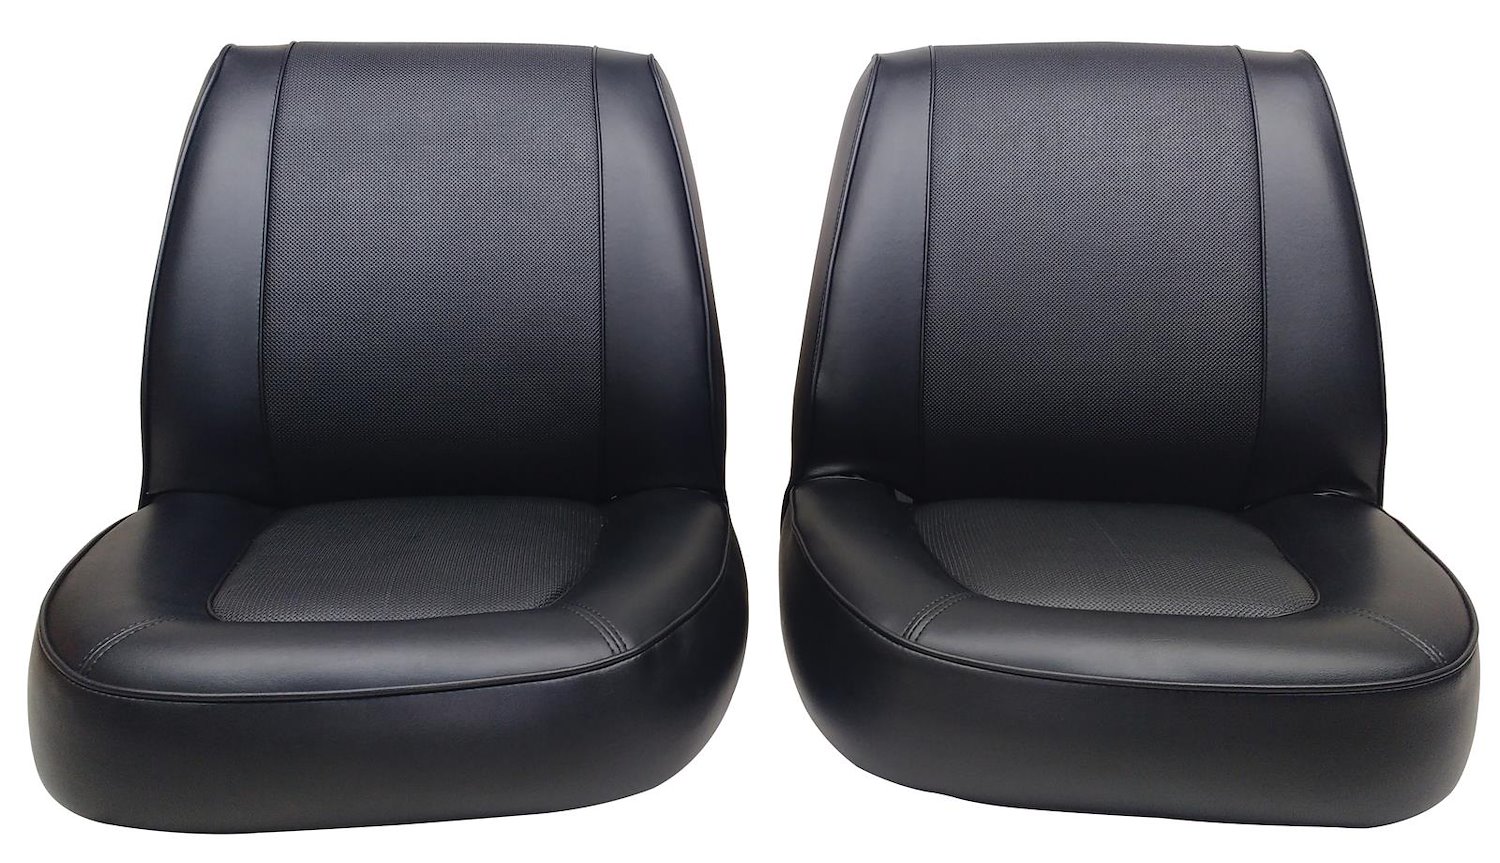 1966-1967 Ford Econoline Falcon Deluxe Club Wagon Interior Front Bucket Seat Upholstery Set for models equipped with folding dri